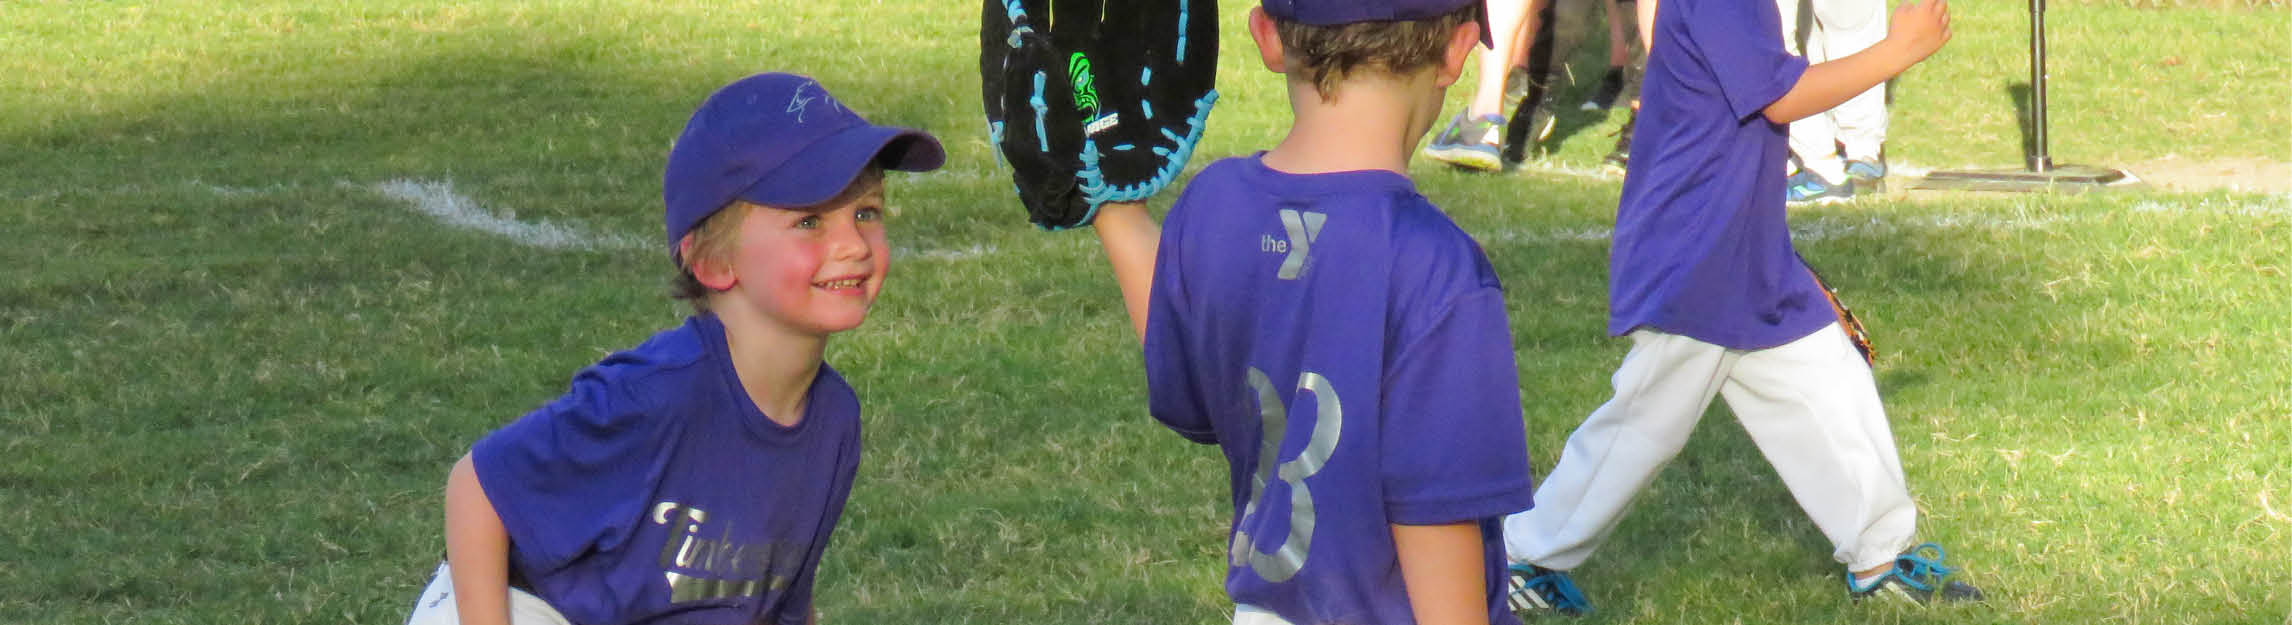 Youth Baseball participant smiling in a purple jersey and baseball cap 